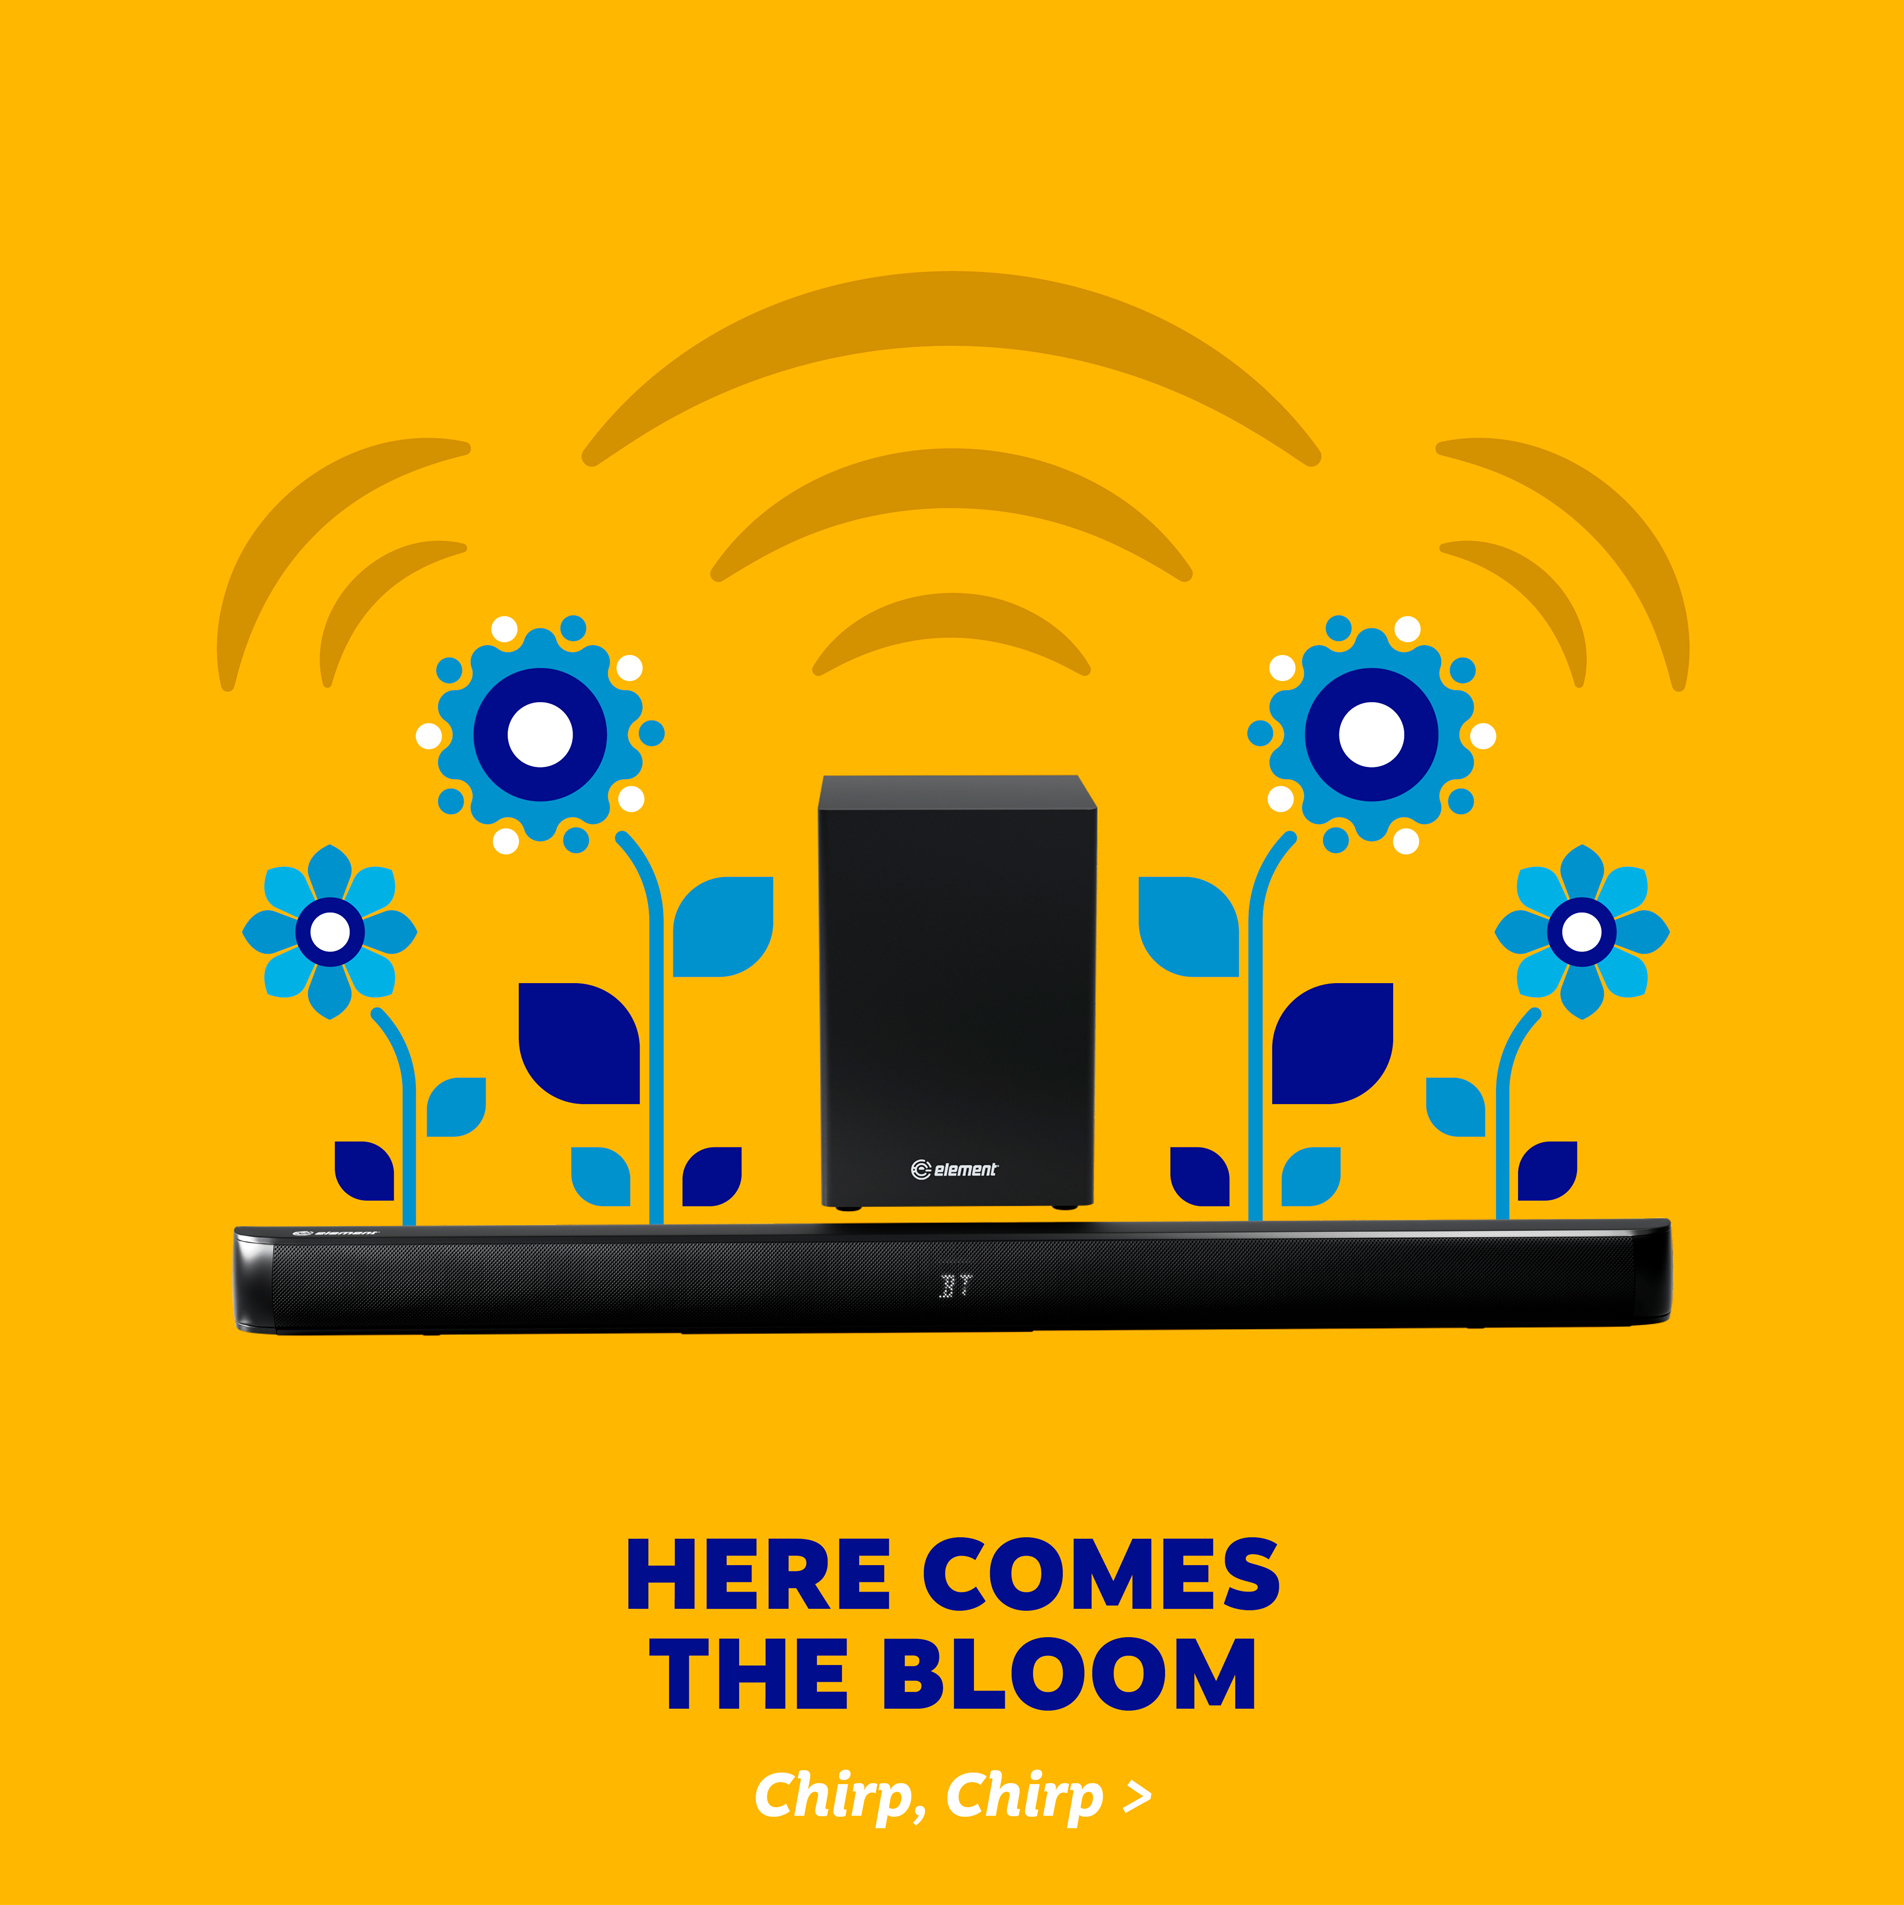 Sound bar and subwoofer image surrounded by flowers with text "here comes the bloom"